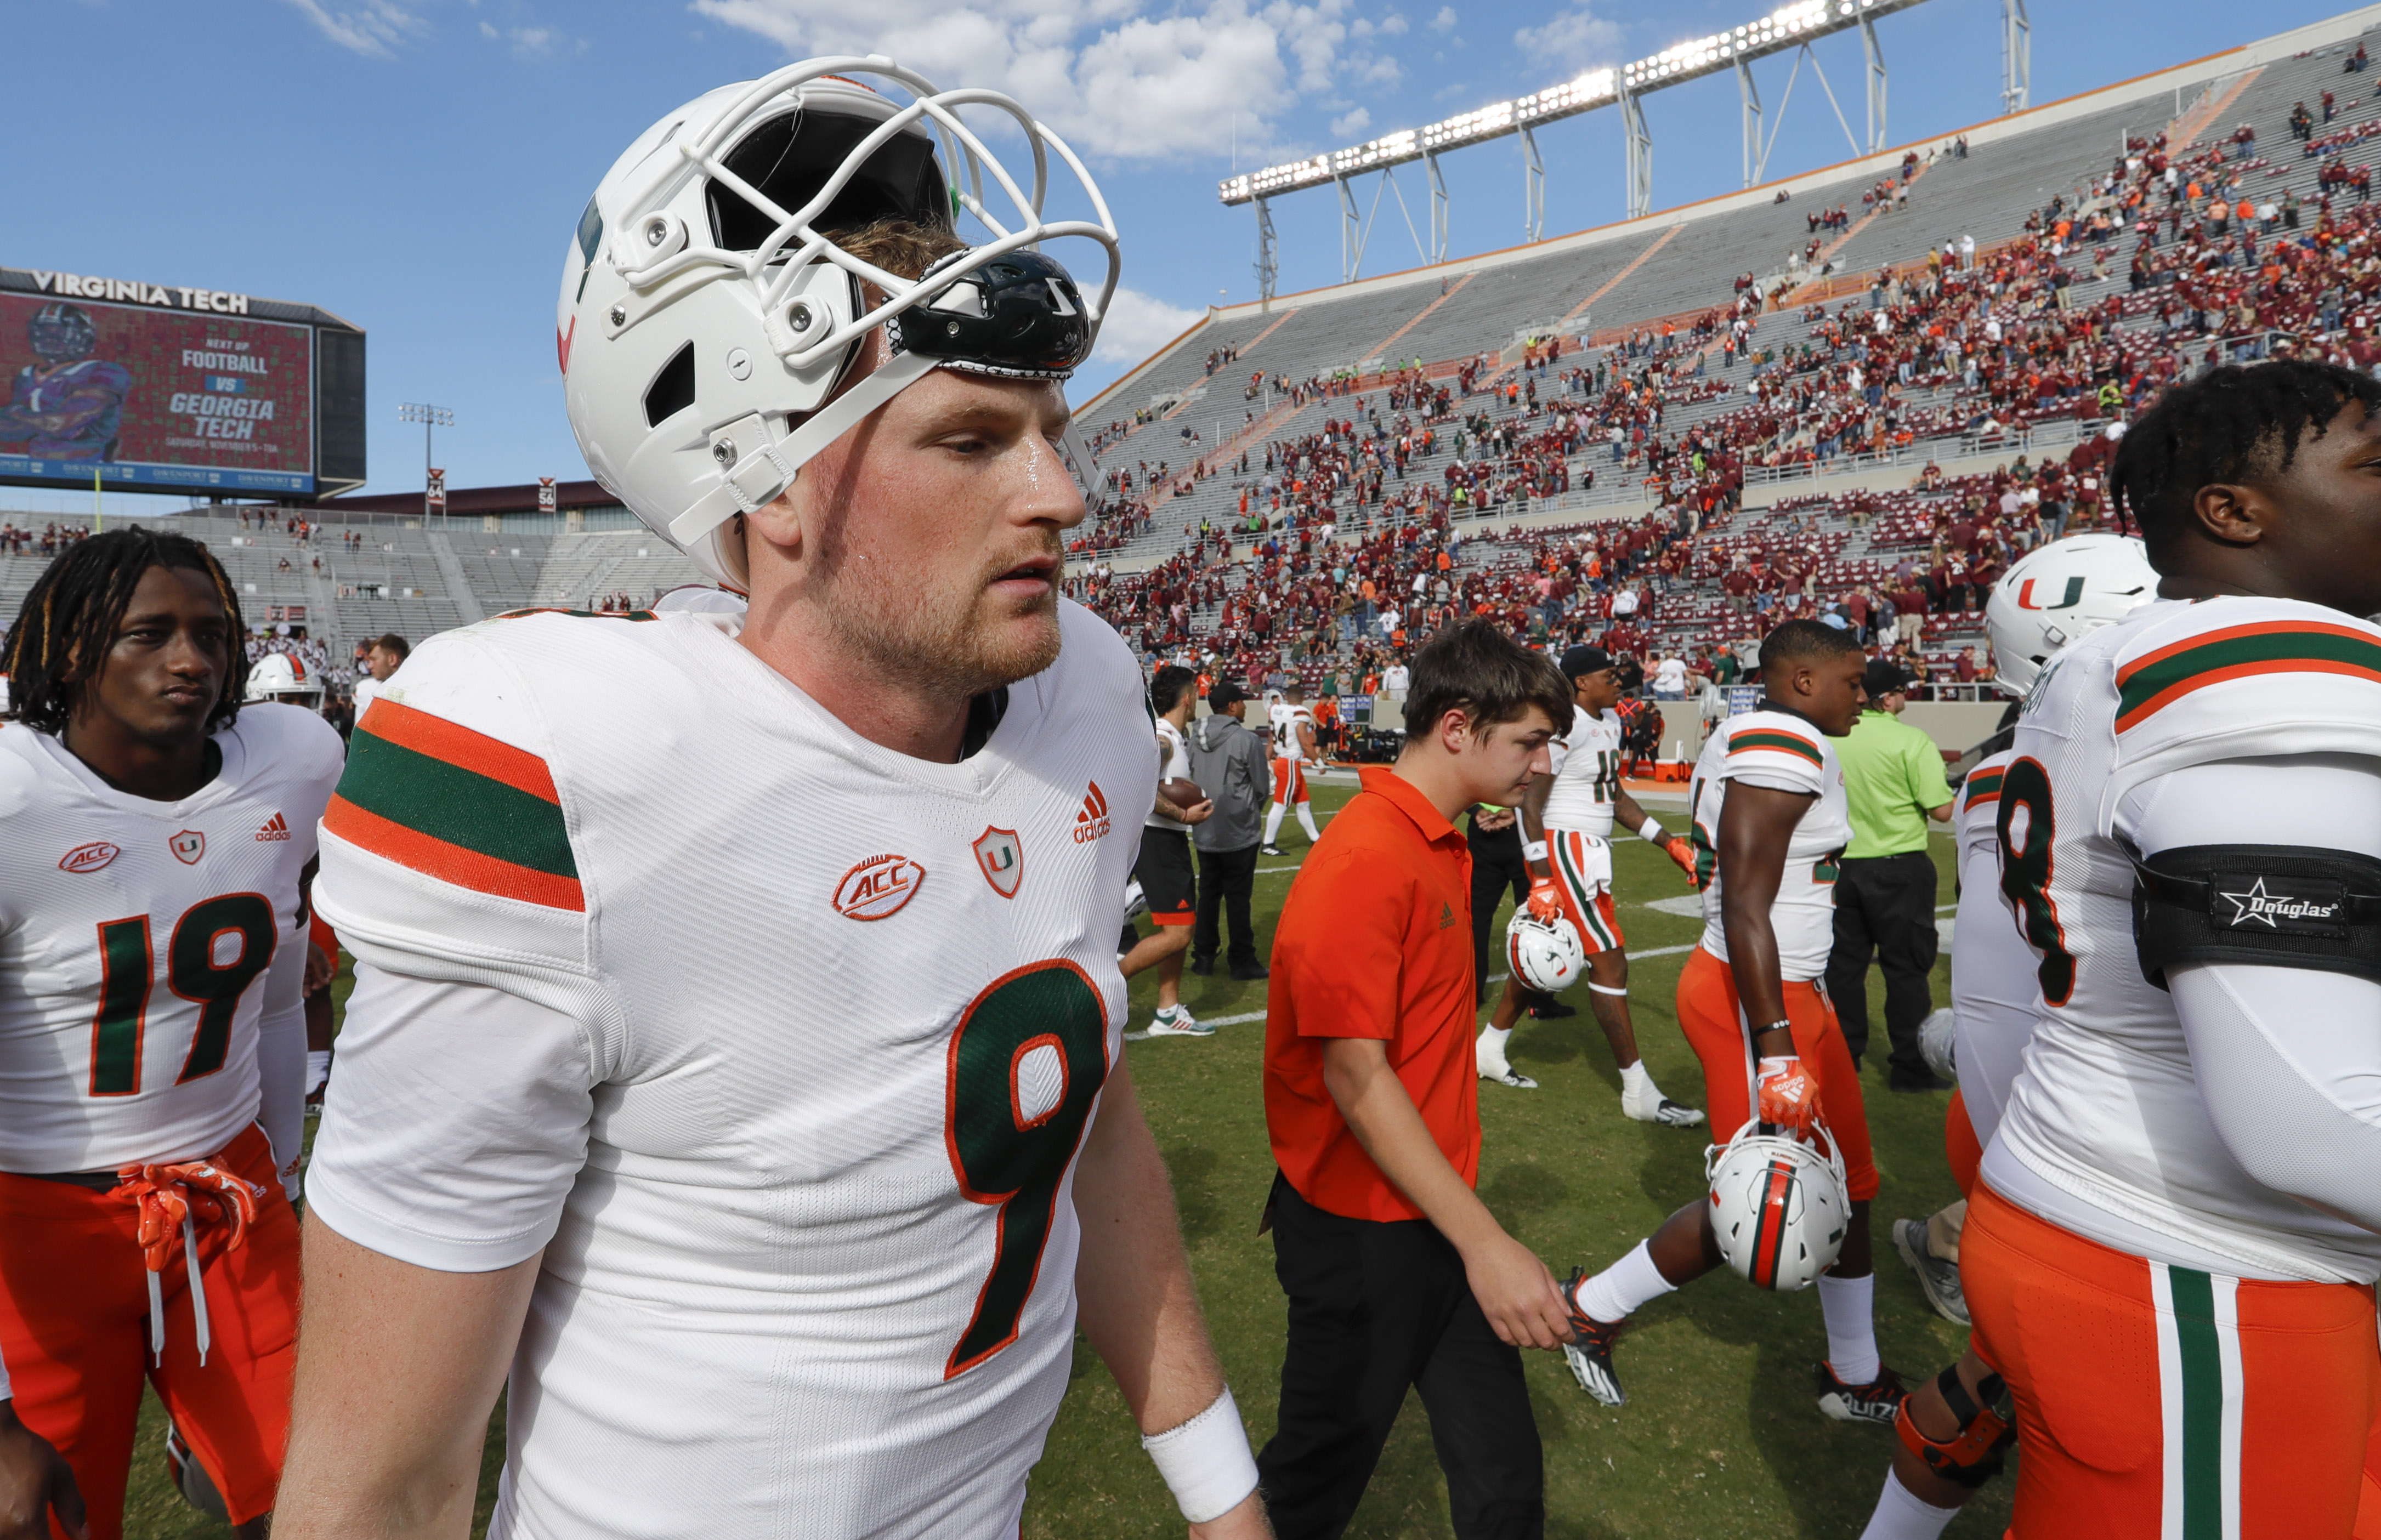 Miami Hurricanes preparing three QBs to play against Florida State